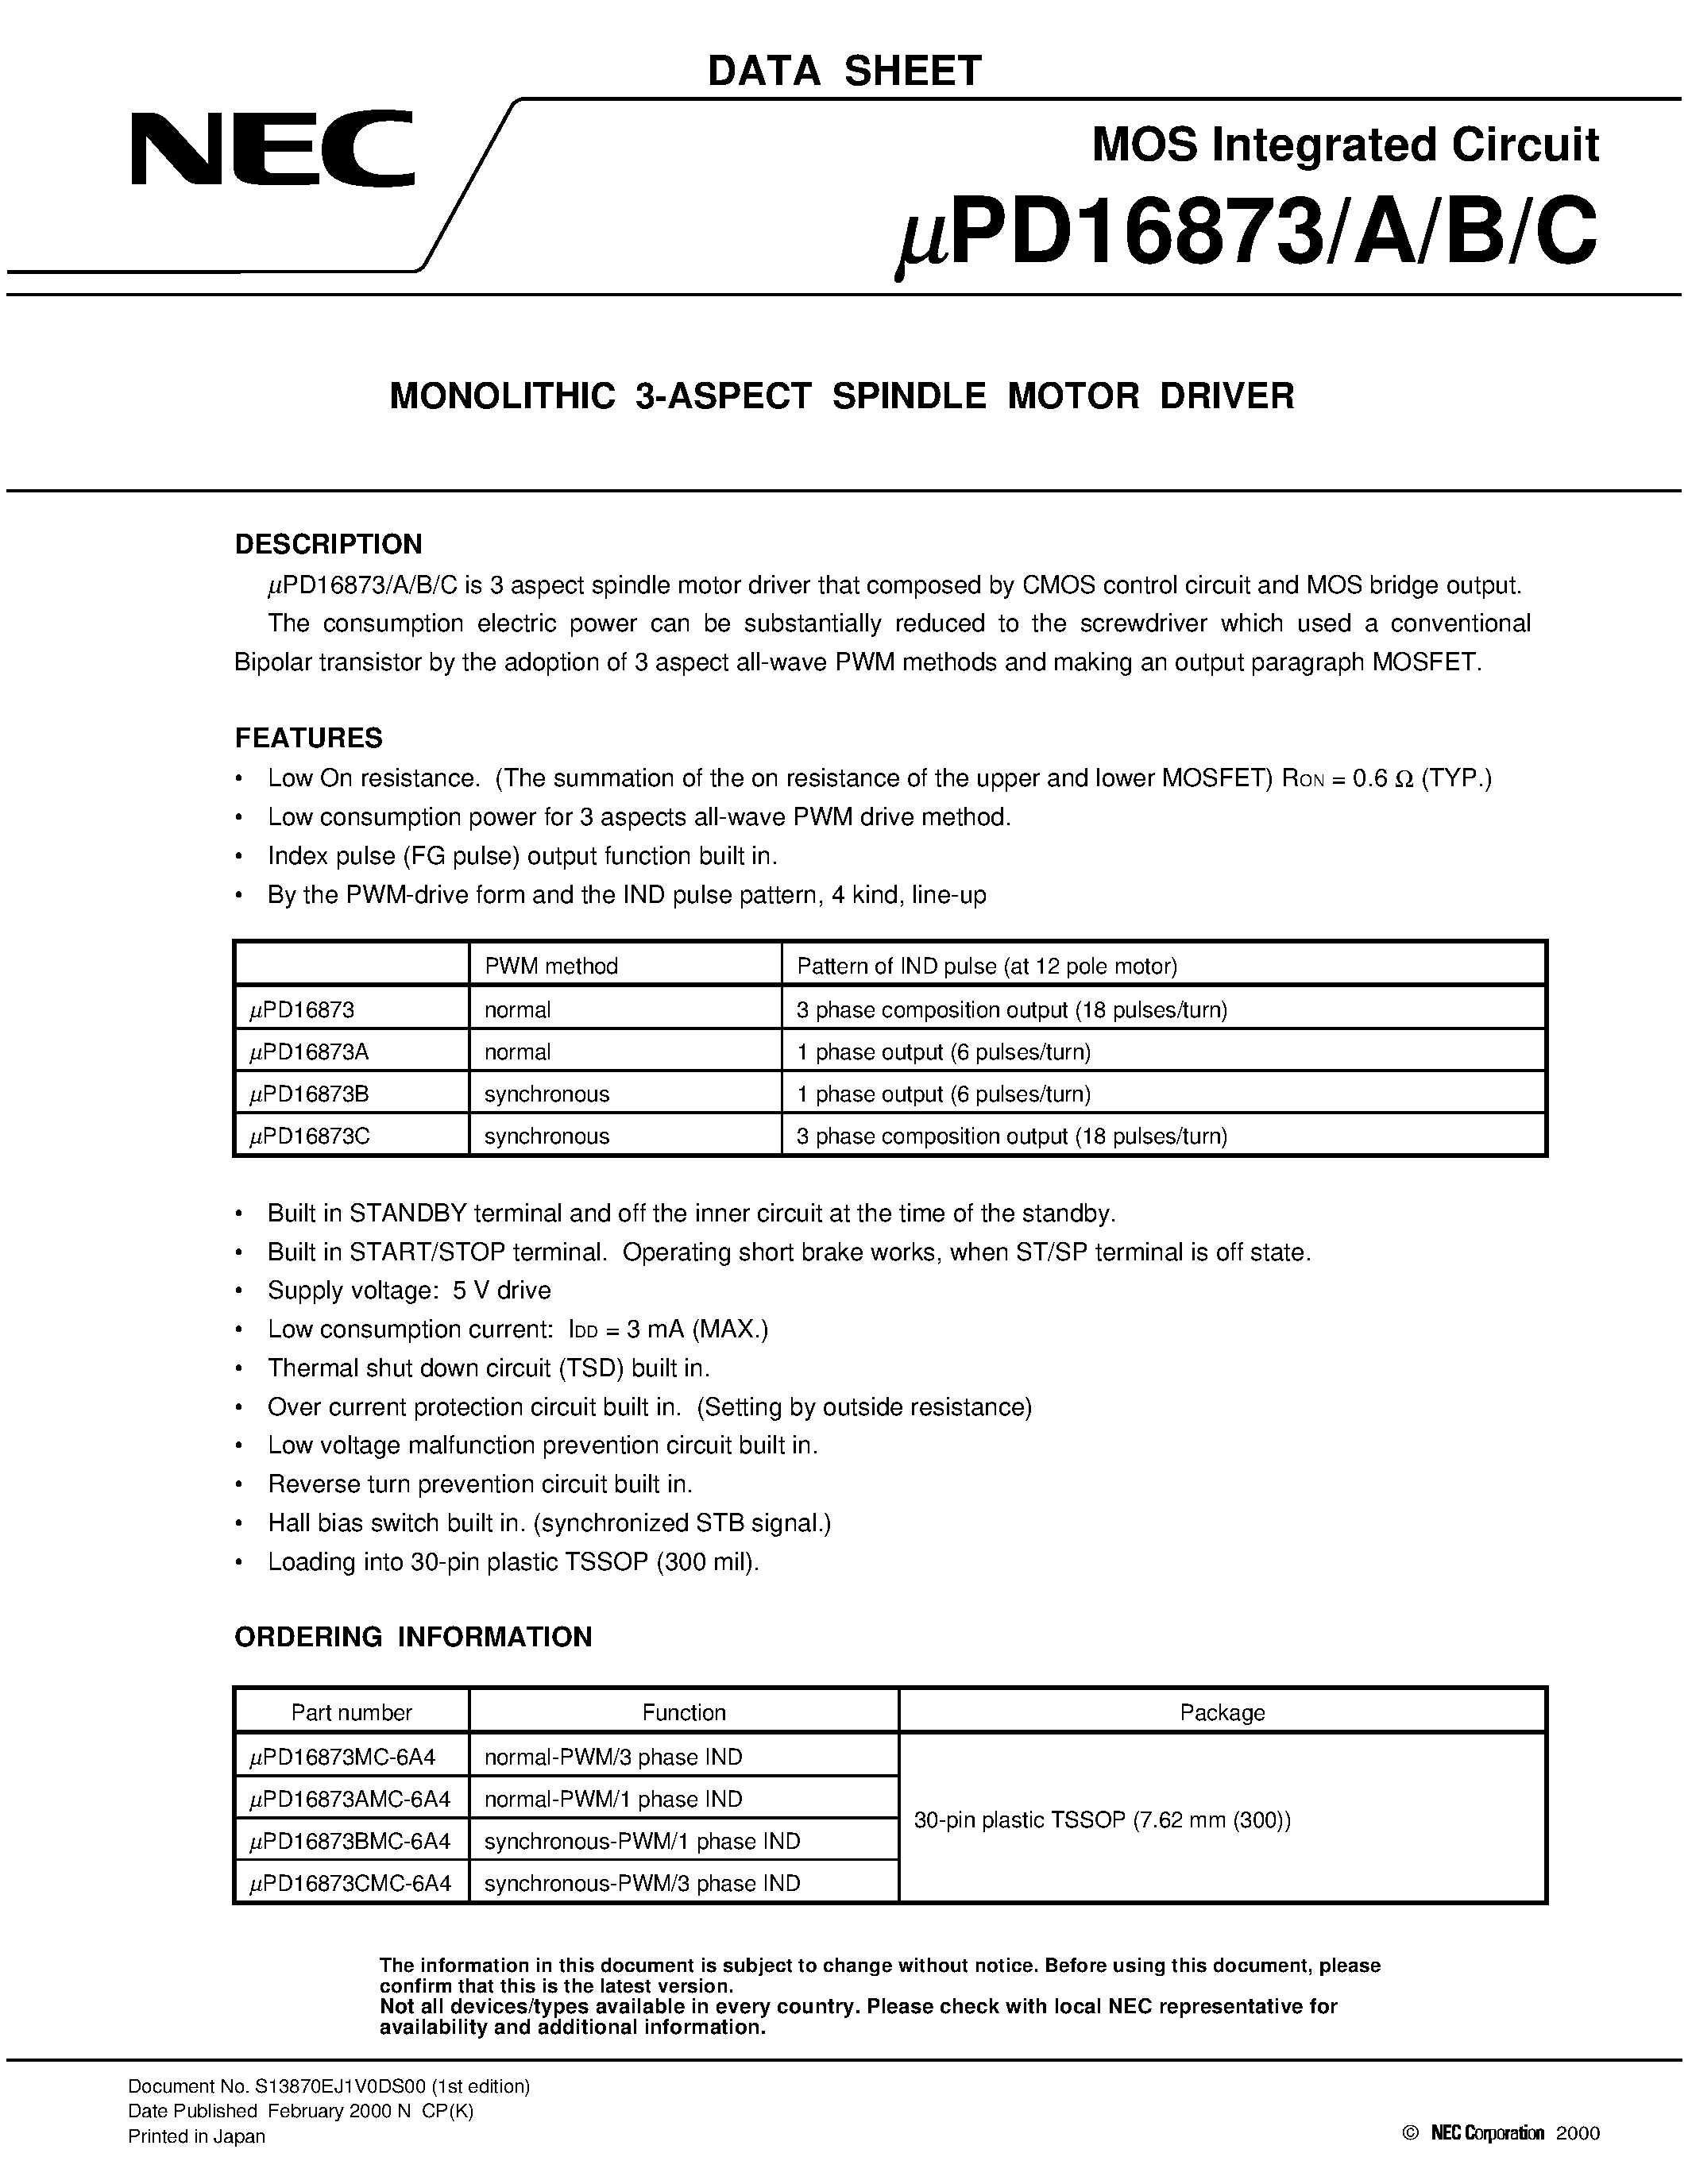 Datasheet UPD16873 - MONOLITHIC 3-ASPECT SPINDLE MOTOR DRIVER page 1